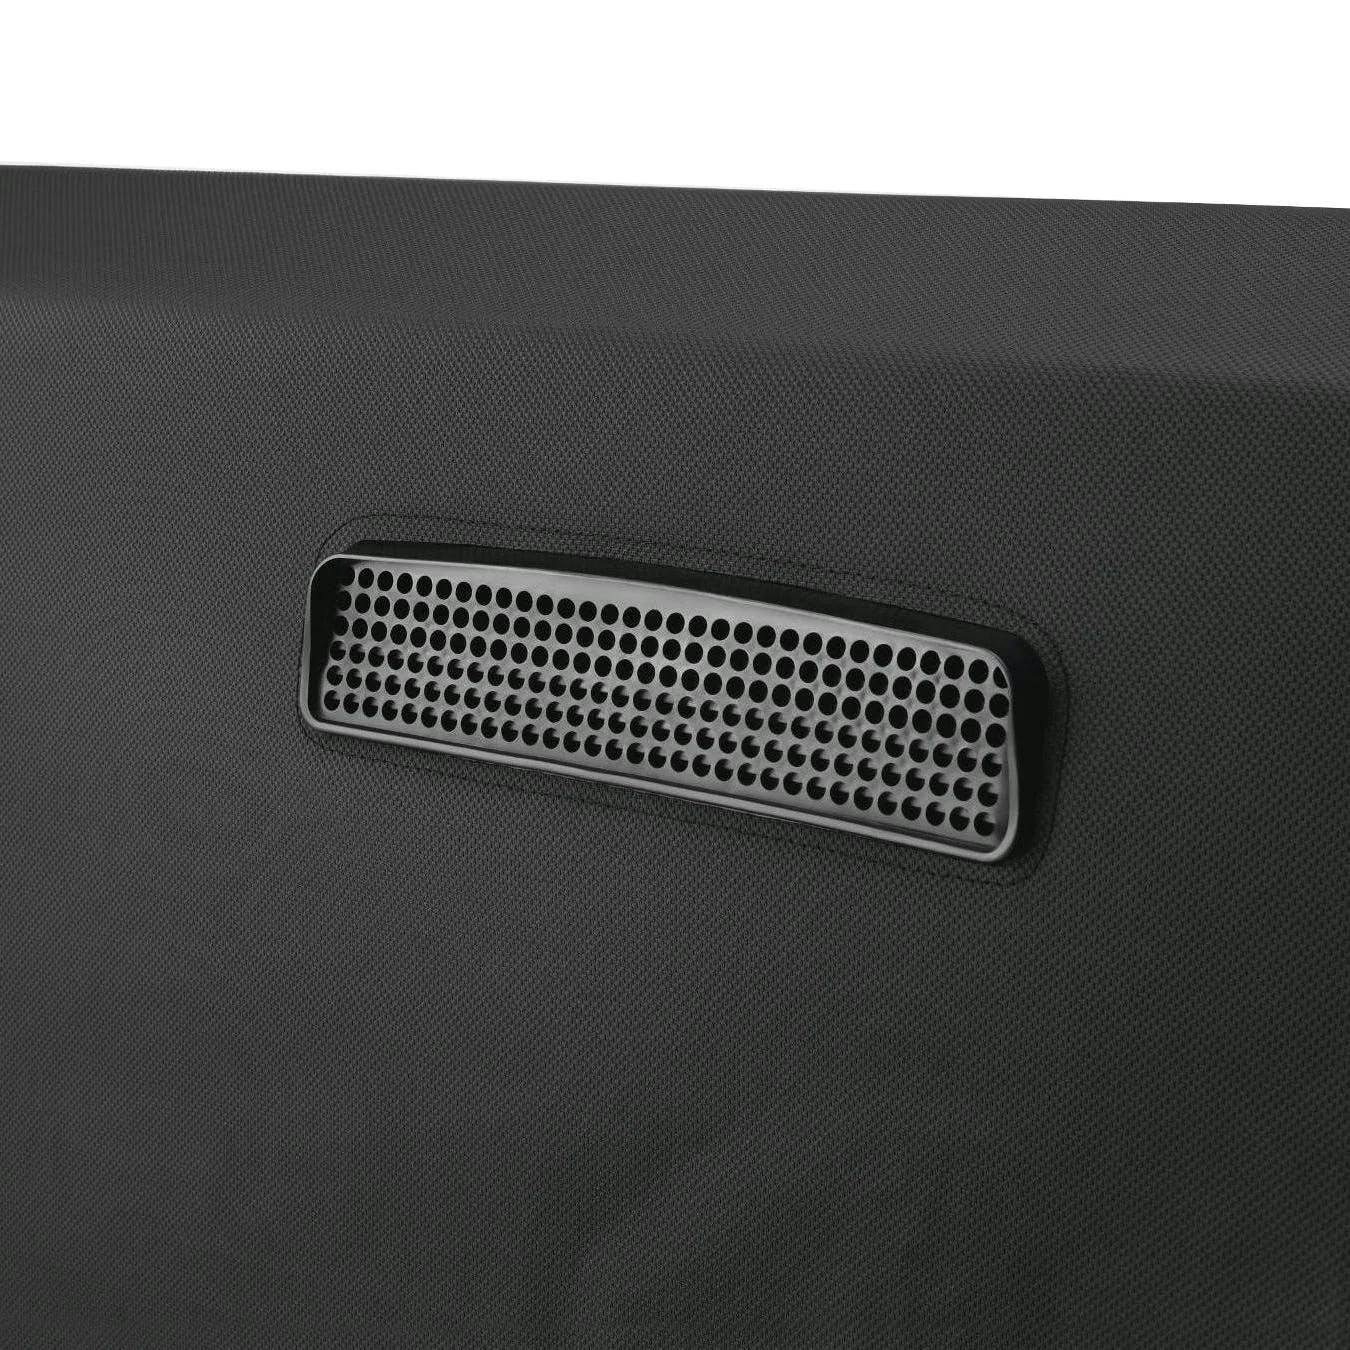 DCS Grill Cover For Gas Grill